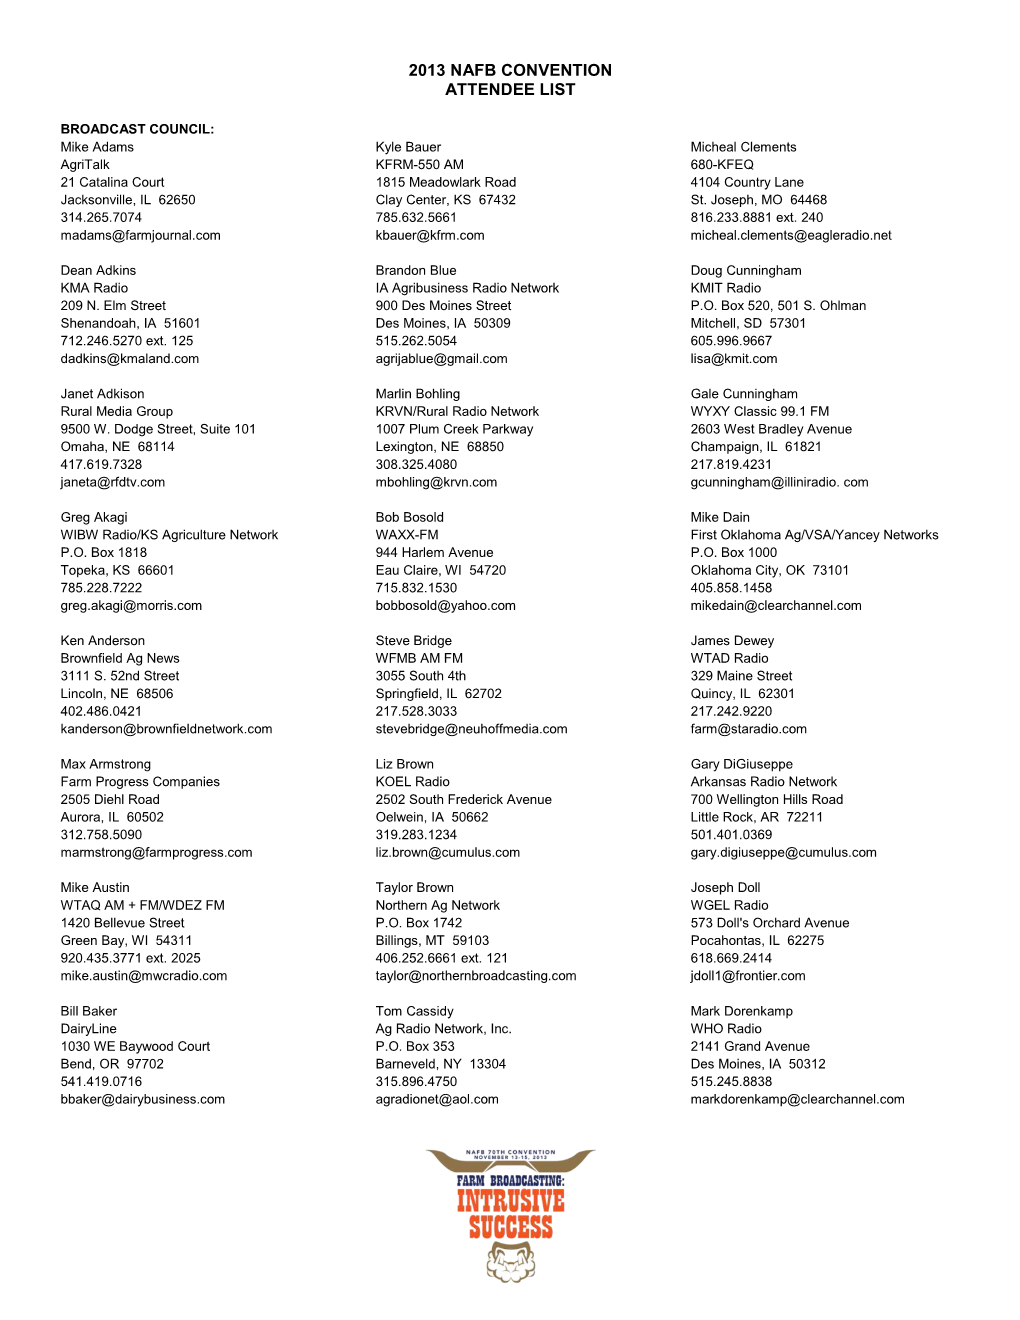 2013 Nafb Convention Attendee List